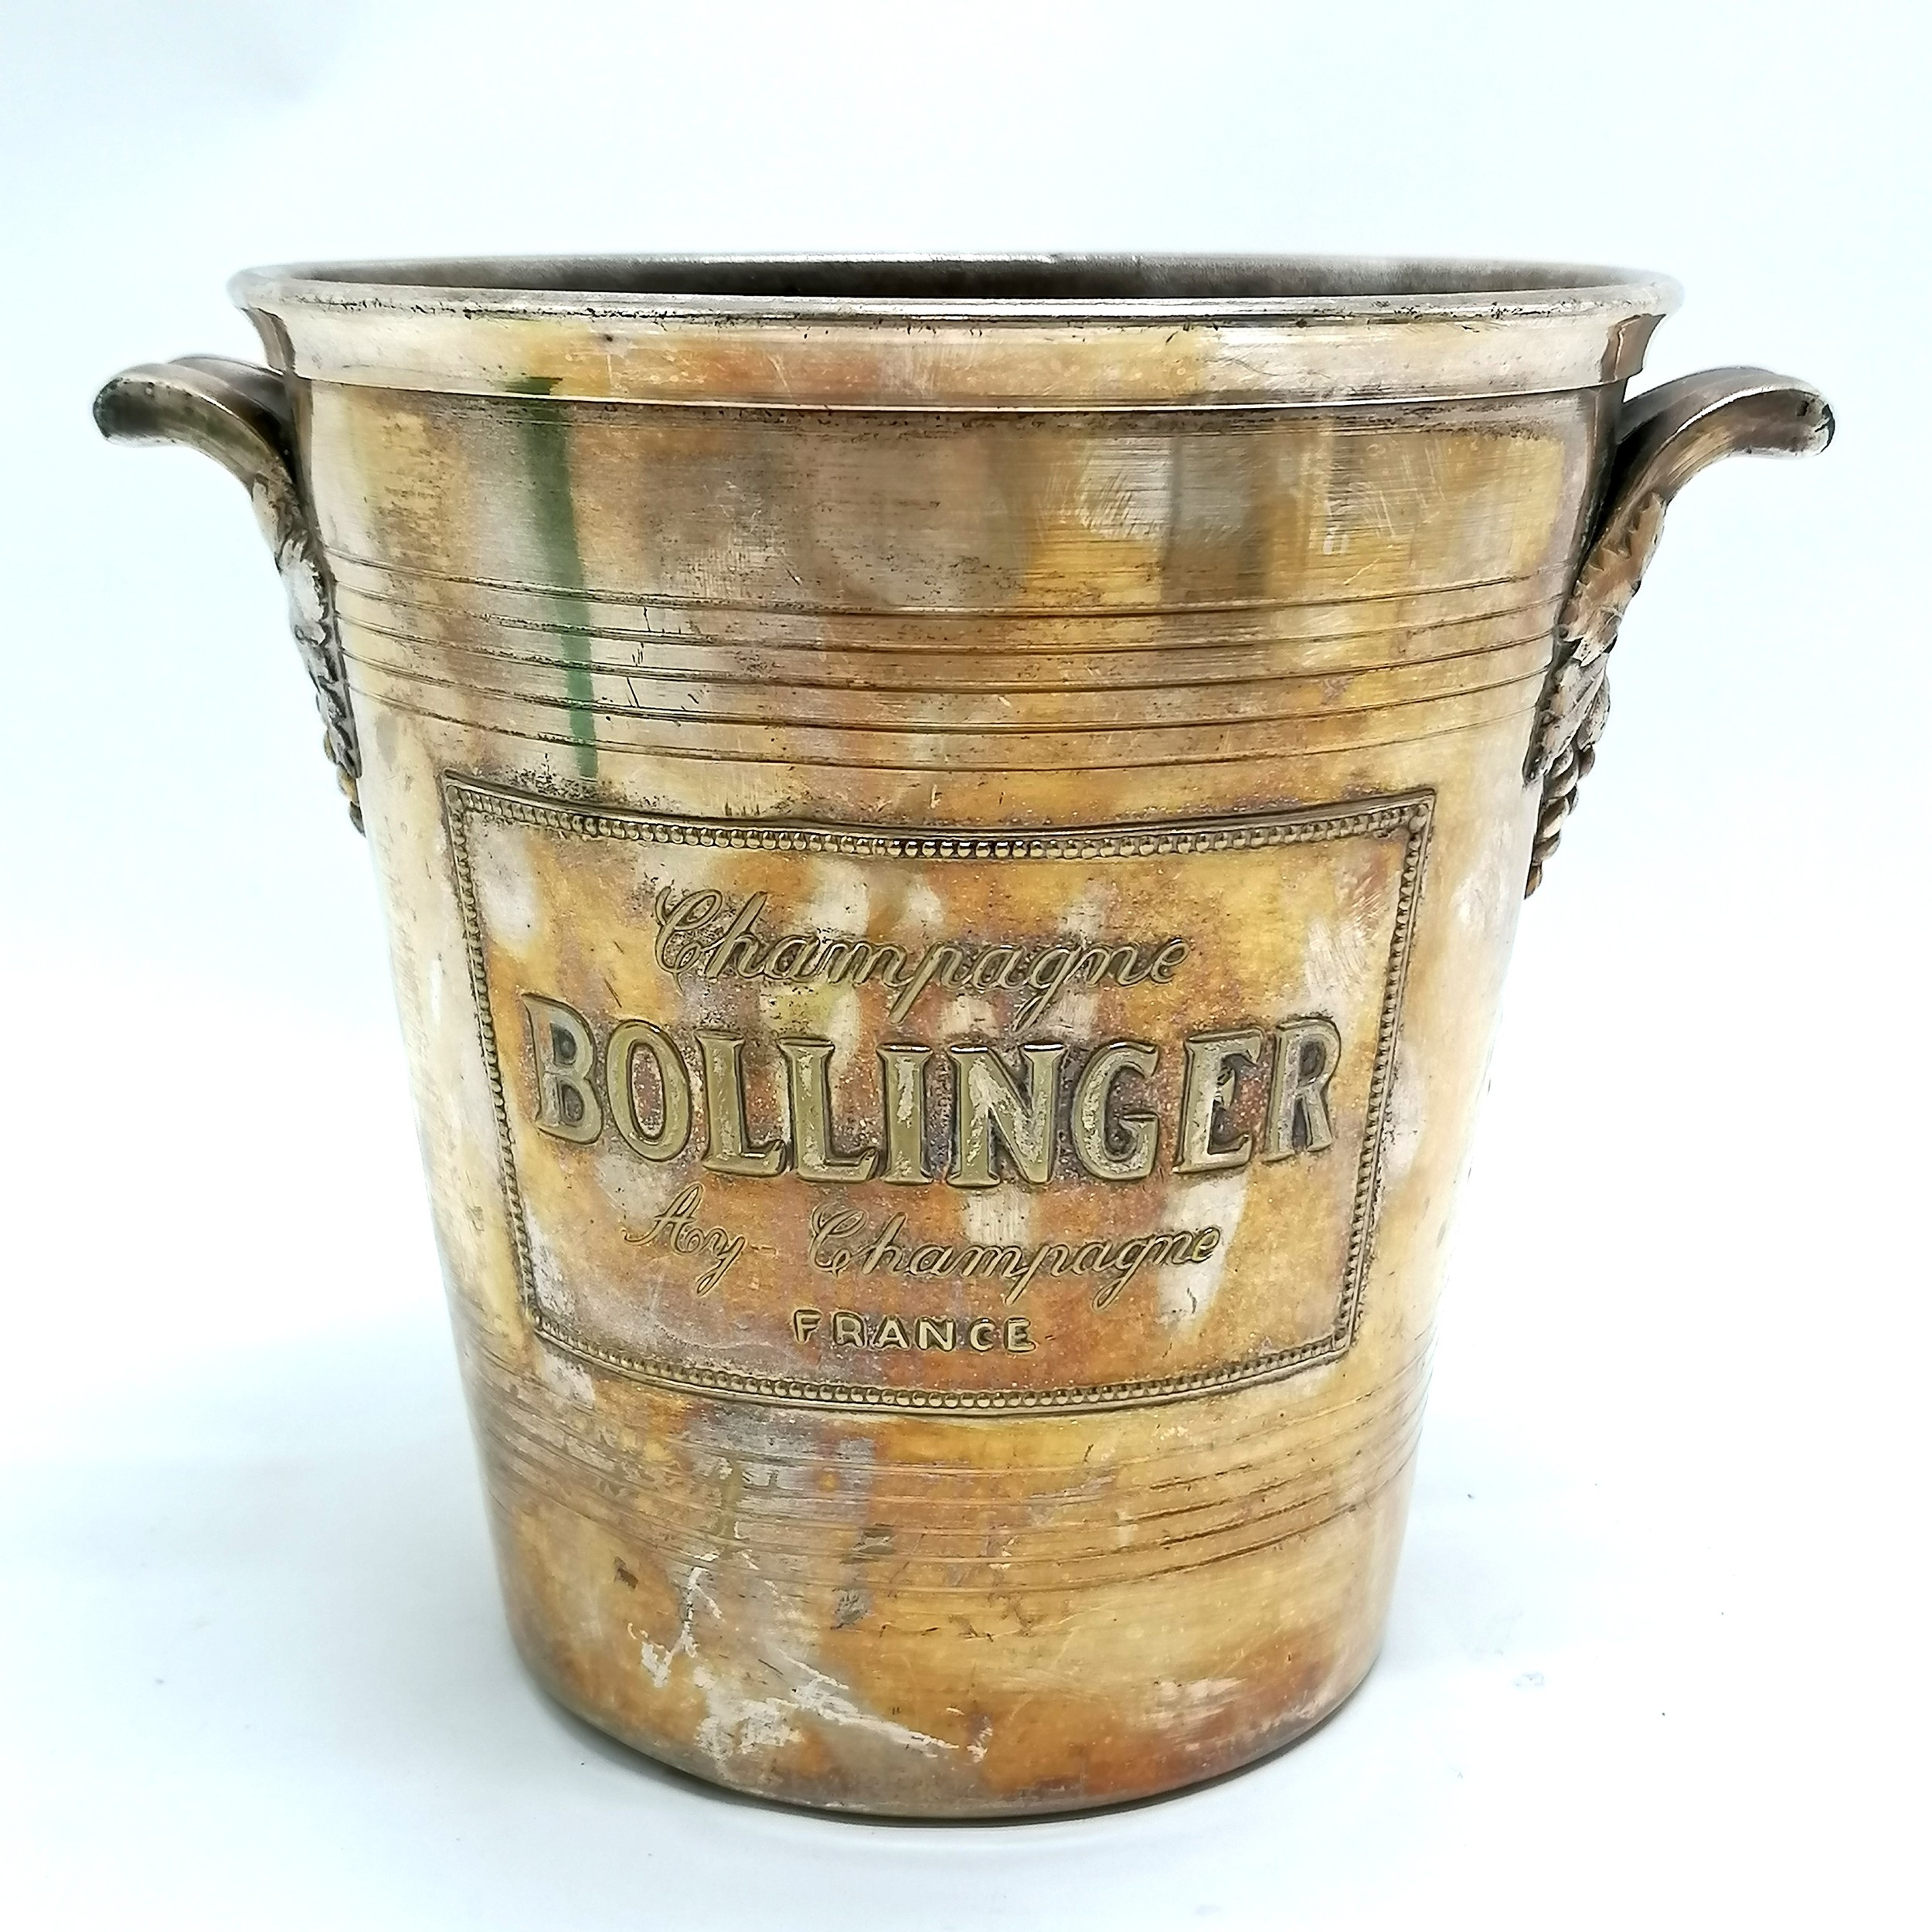 French silver plated Bollinger Champagne bucket by Argit with grape detail handles 21cm high x